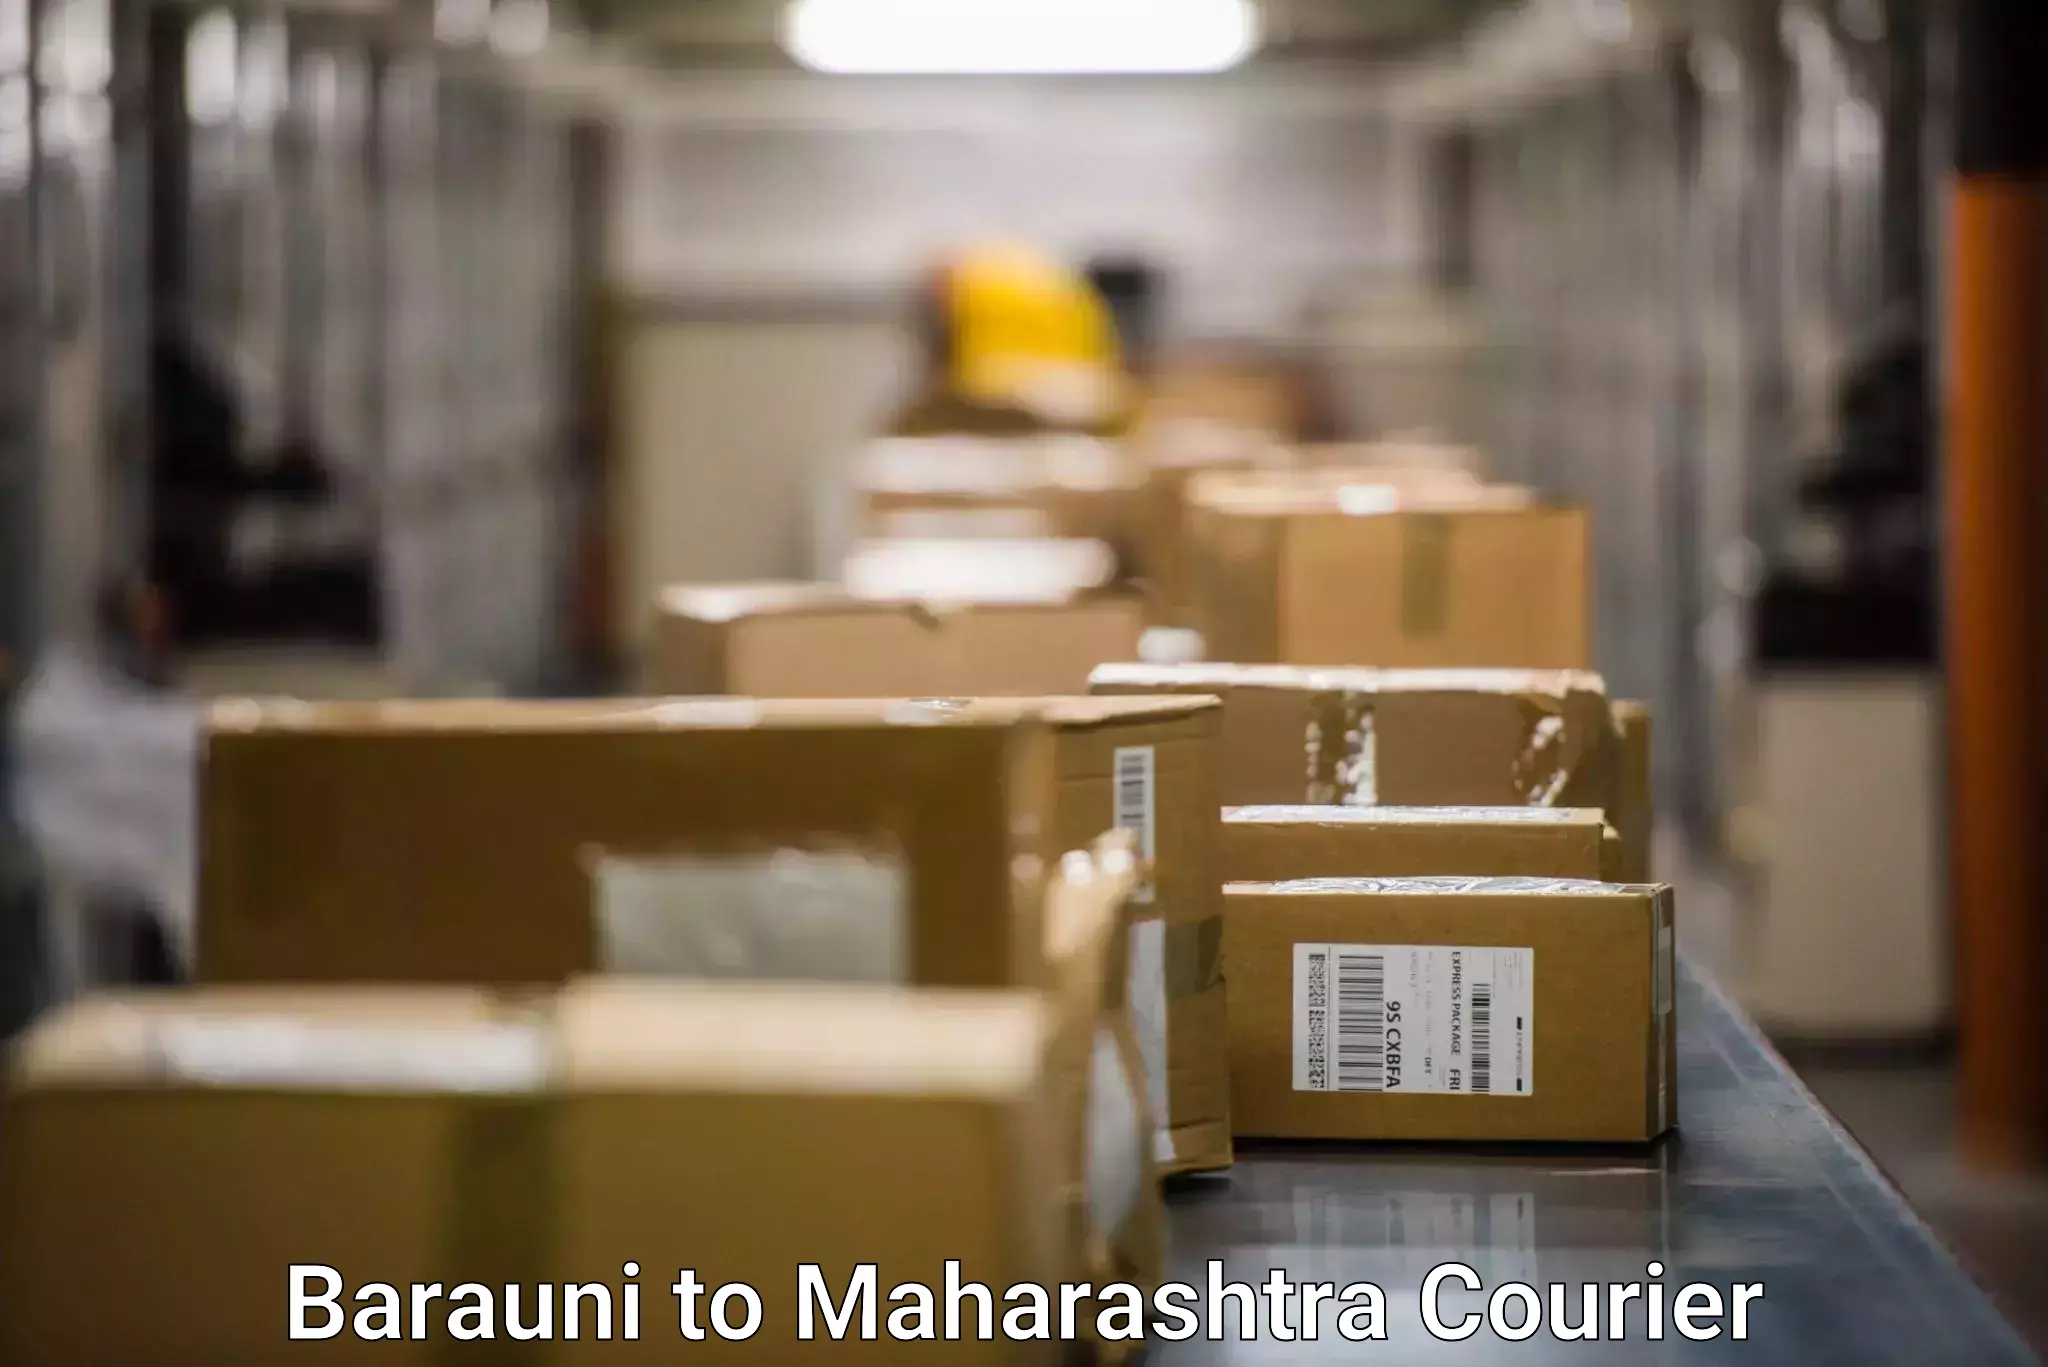 Efficient order fulfillment Barauni to Dhule